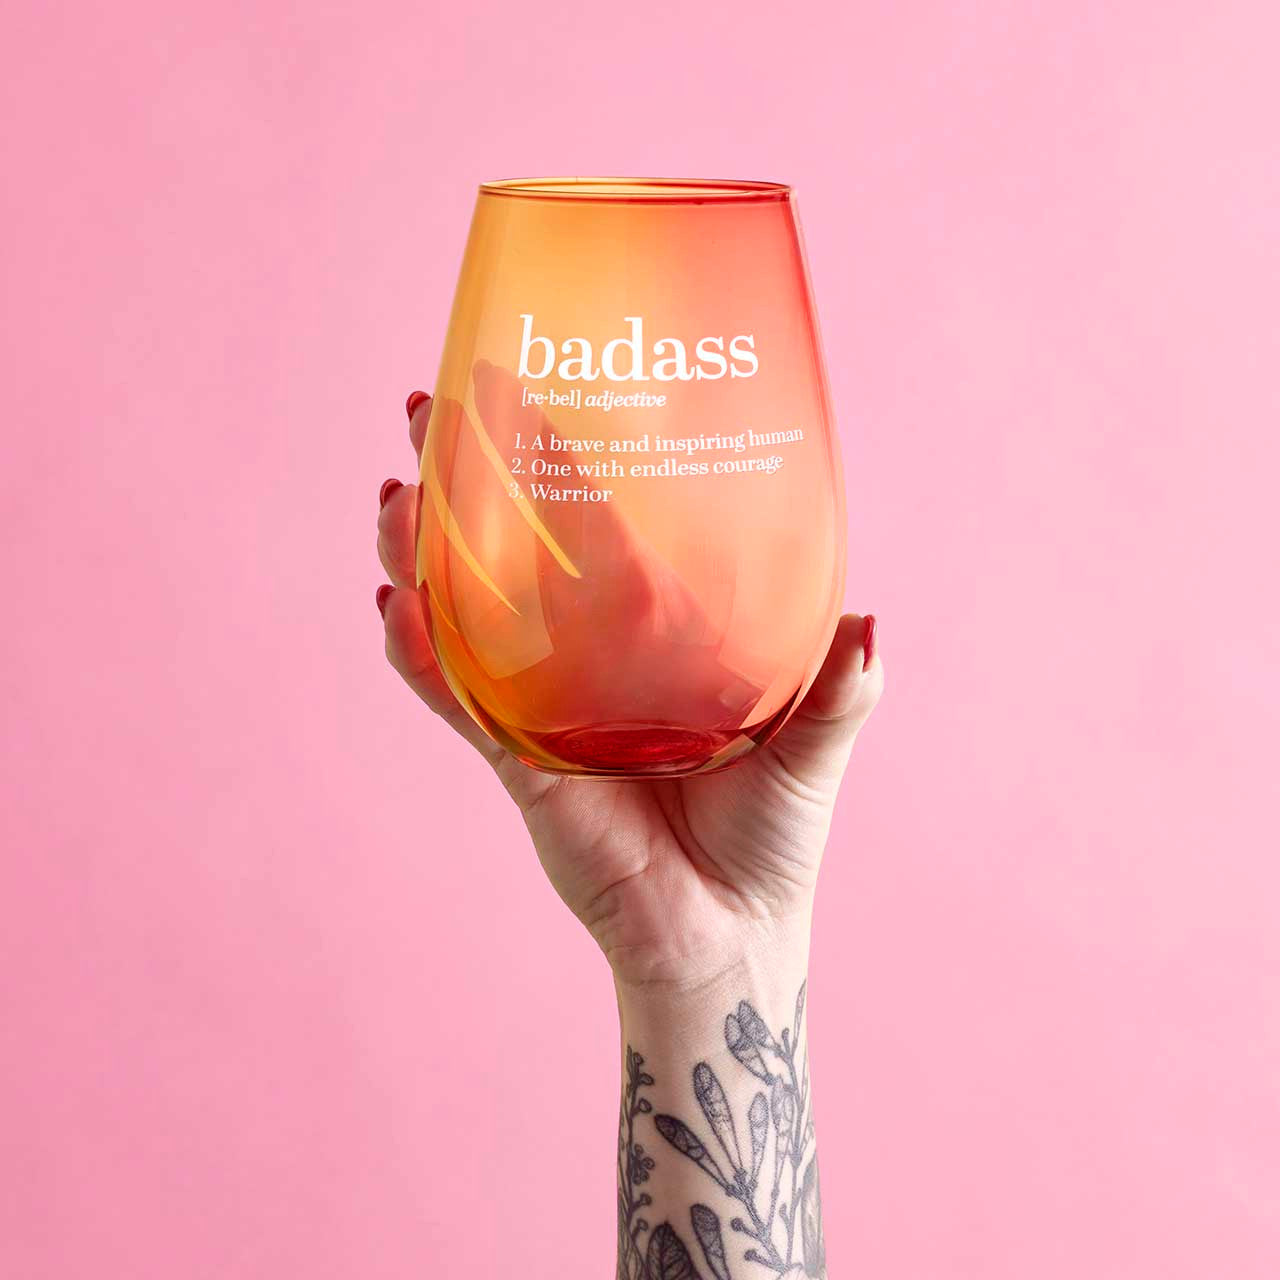 Badass Jumbo Stemless Wine Glass in Orange Pink Ombre | 30 Oz. | Holds an Entire Bottle of Wine